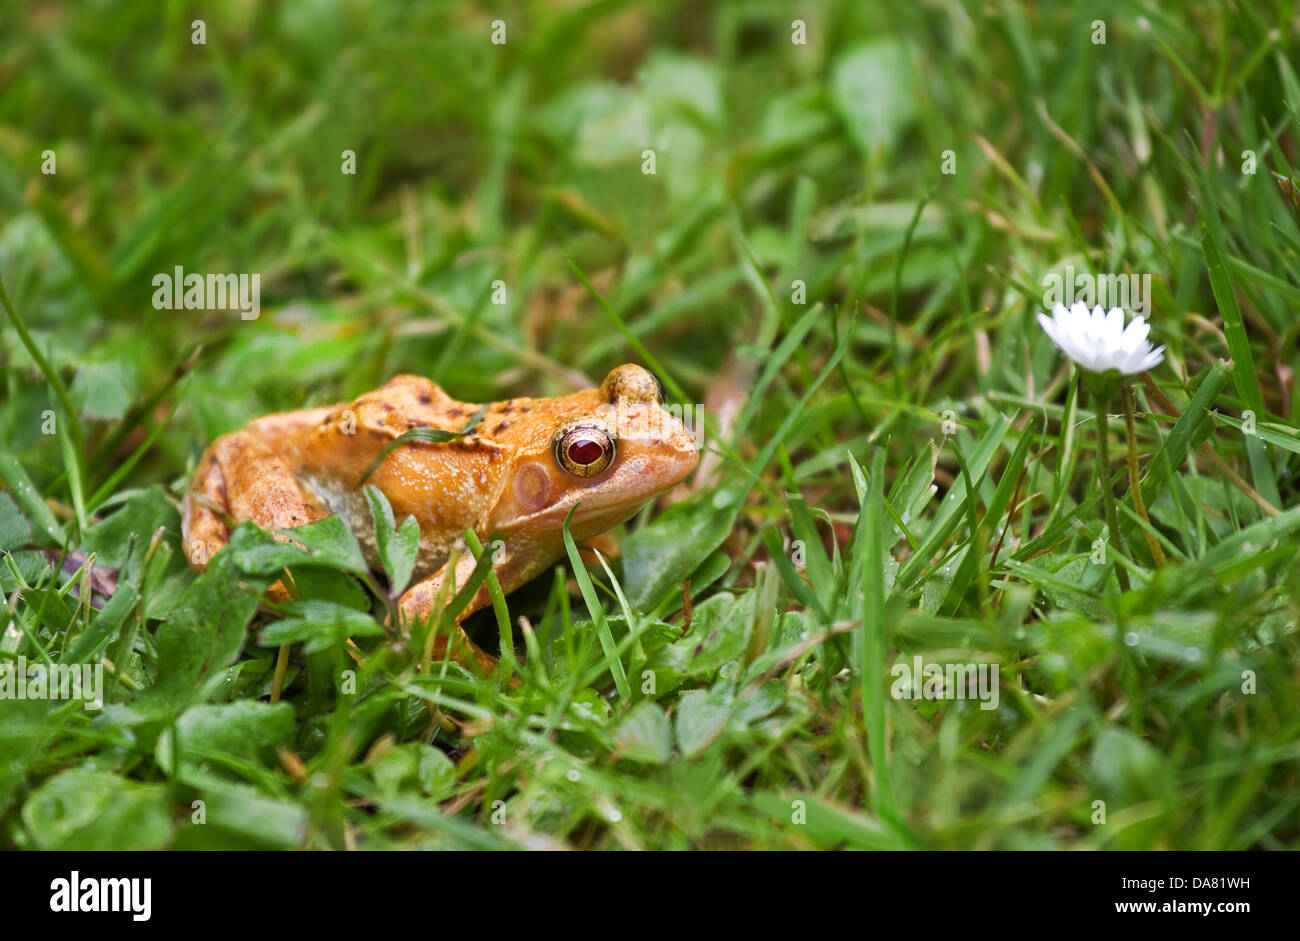 Albino frog with red eyes sitting on grass in the rain Stock Photo